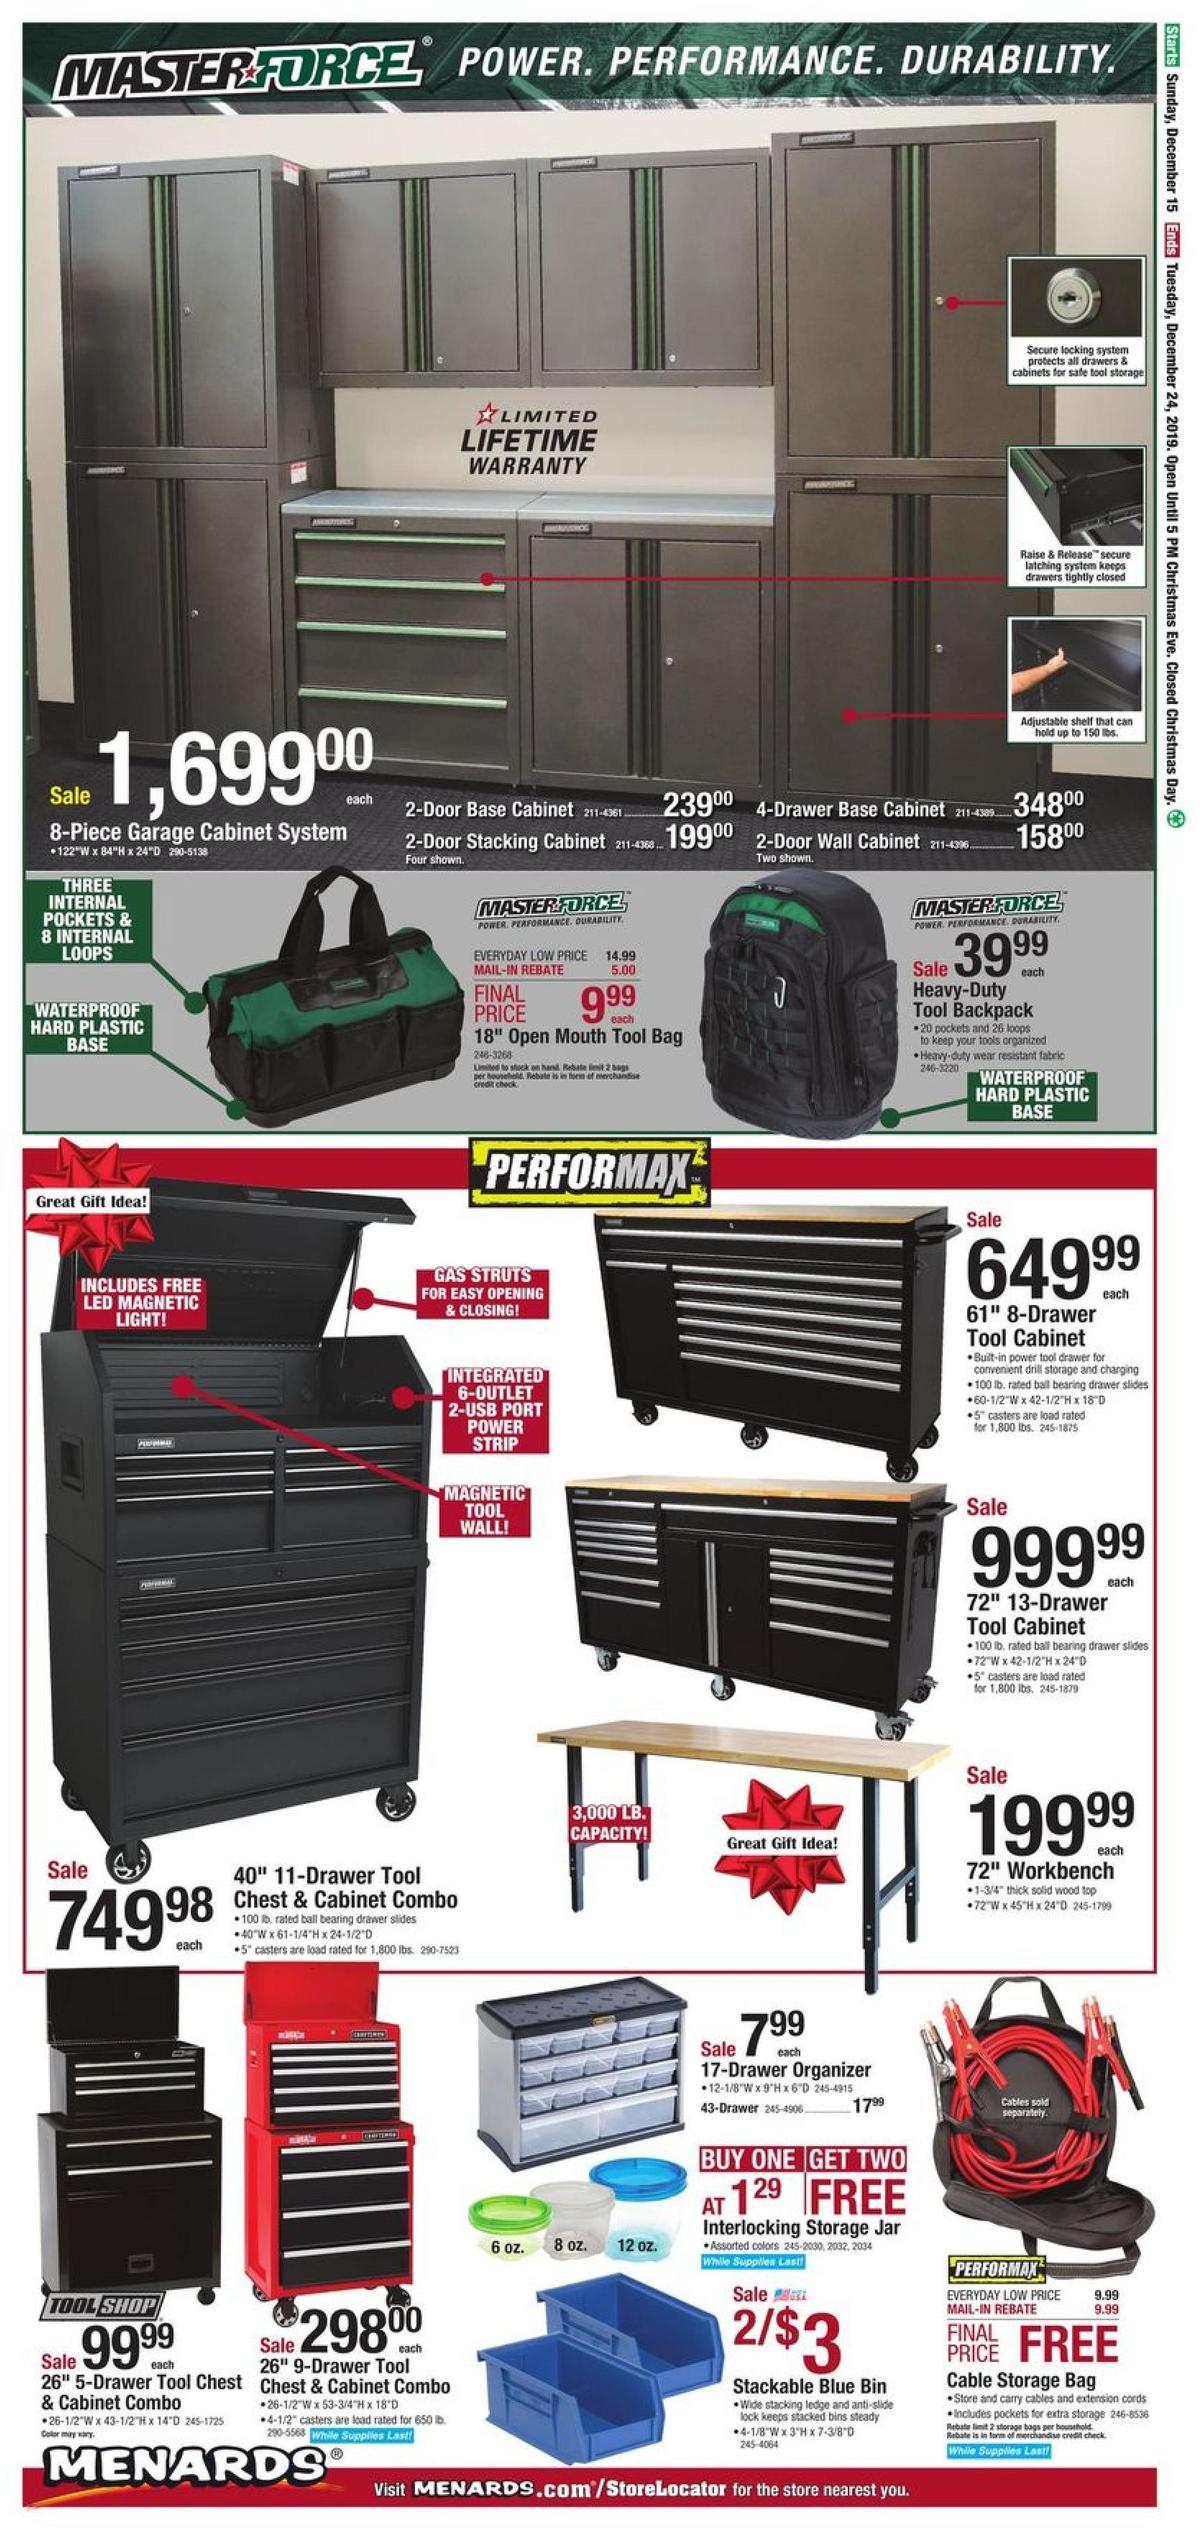 Menards Christmas Sale - Tools Weekly Ad from December 15